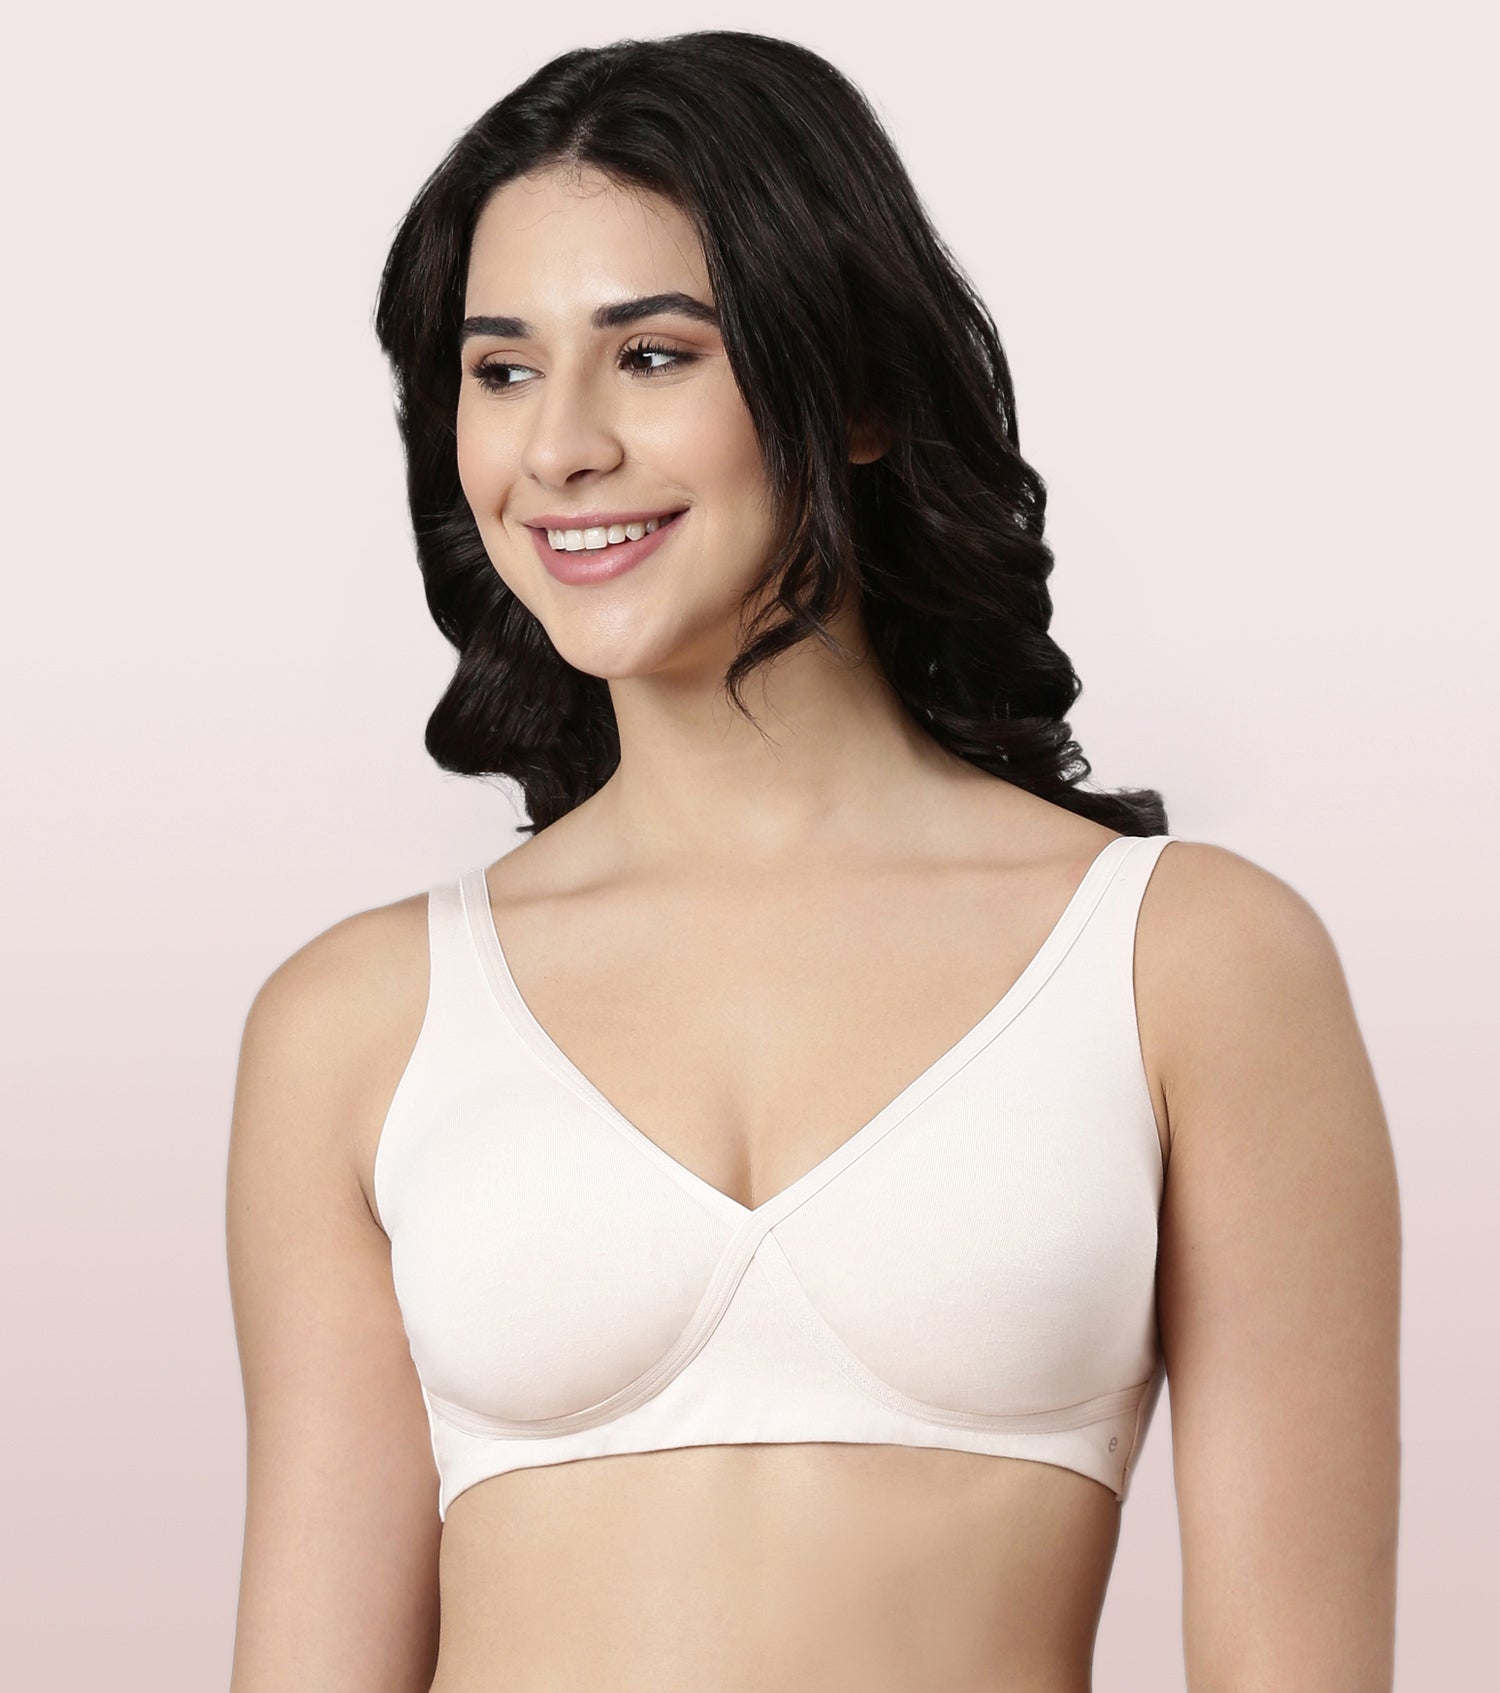 More of Me to Love Bamboo-Cotton Bra Liner – Black, White, Beige, 3-pack,  X-Large – Sweat-Wicking & Antibacterial 